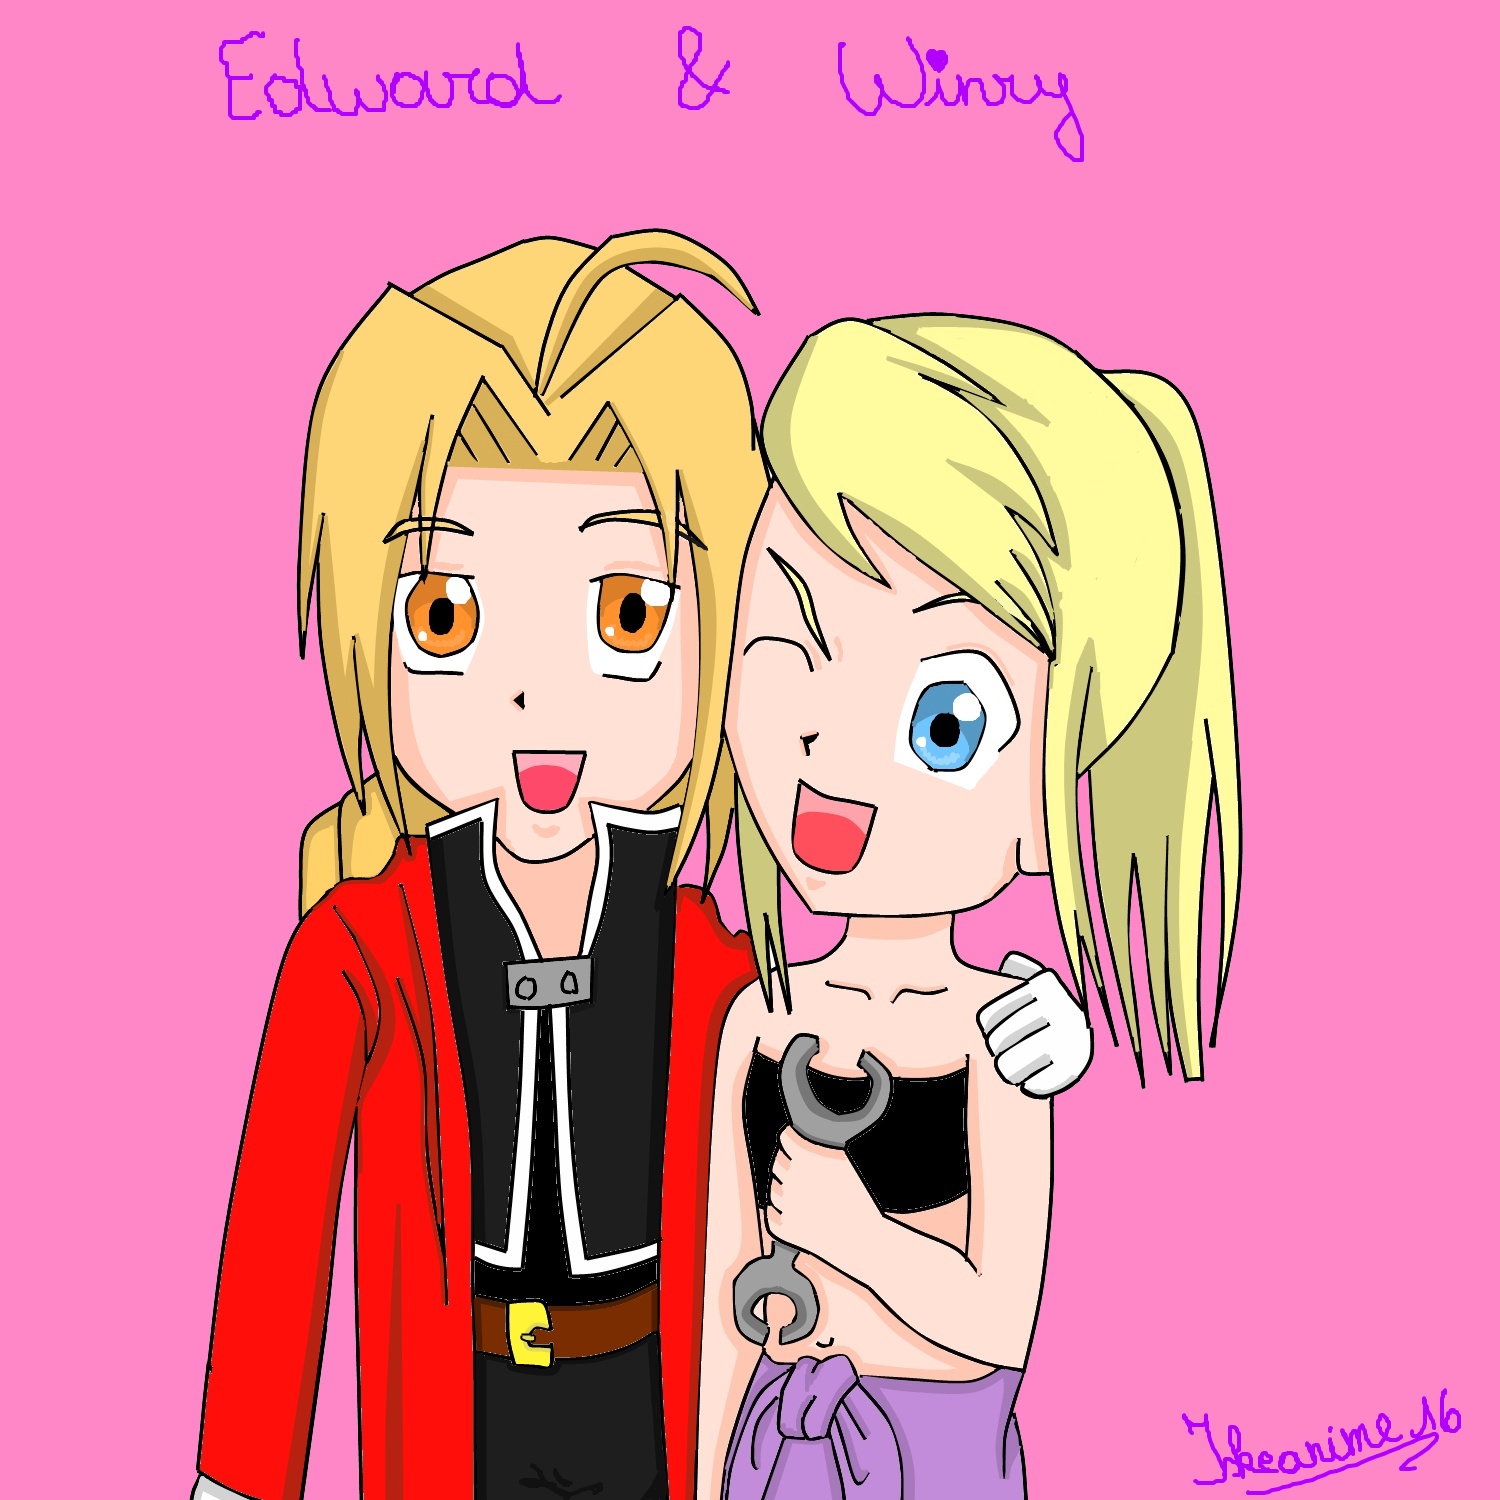 Edward and Winry by Iskeanime16